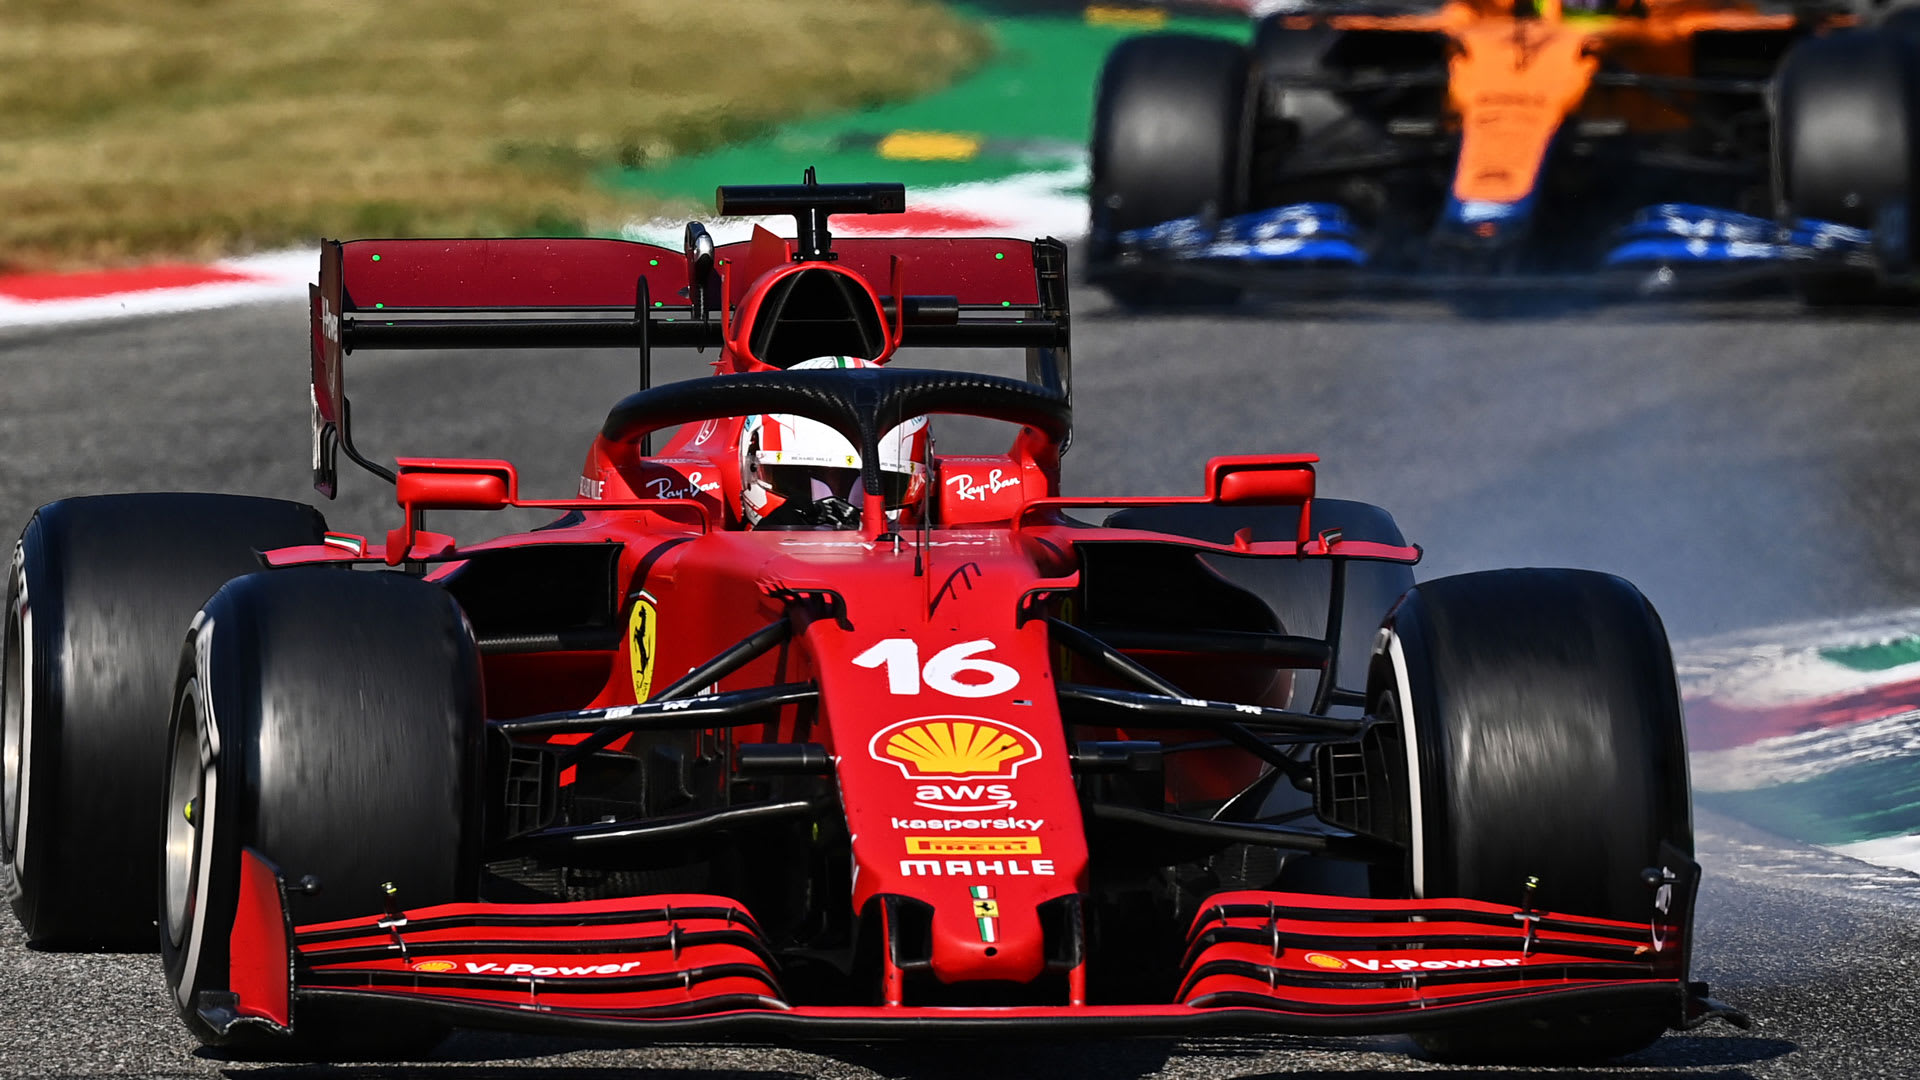 Leclerc confident Ferrari can hunt down McLaren for P3 as he expects a strong race for the Scuderia in Mexico Formula 1®